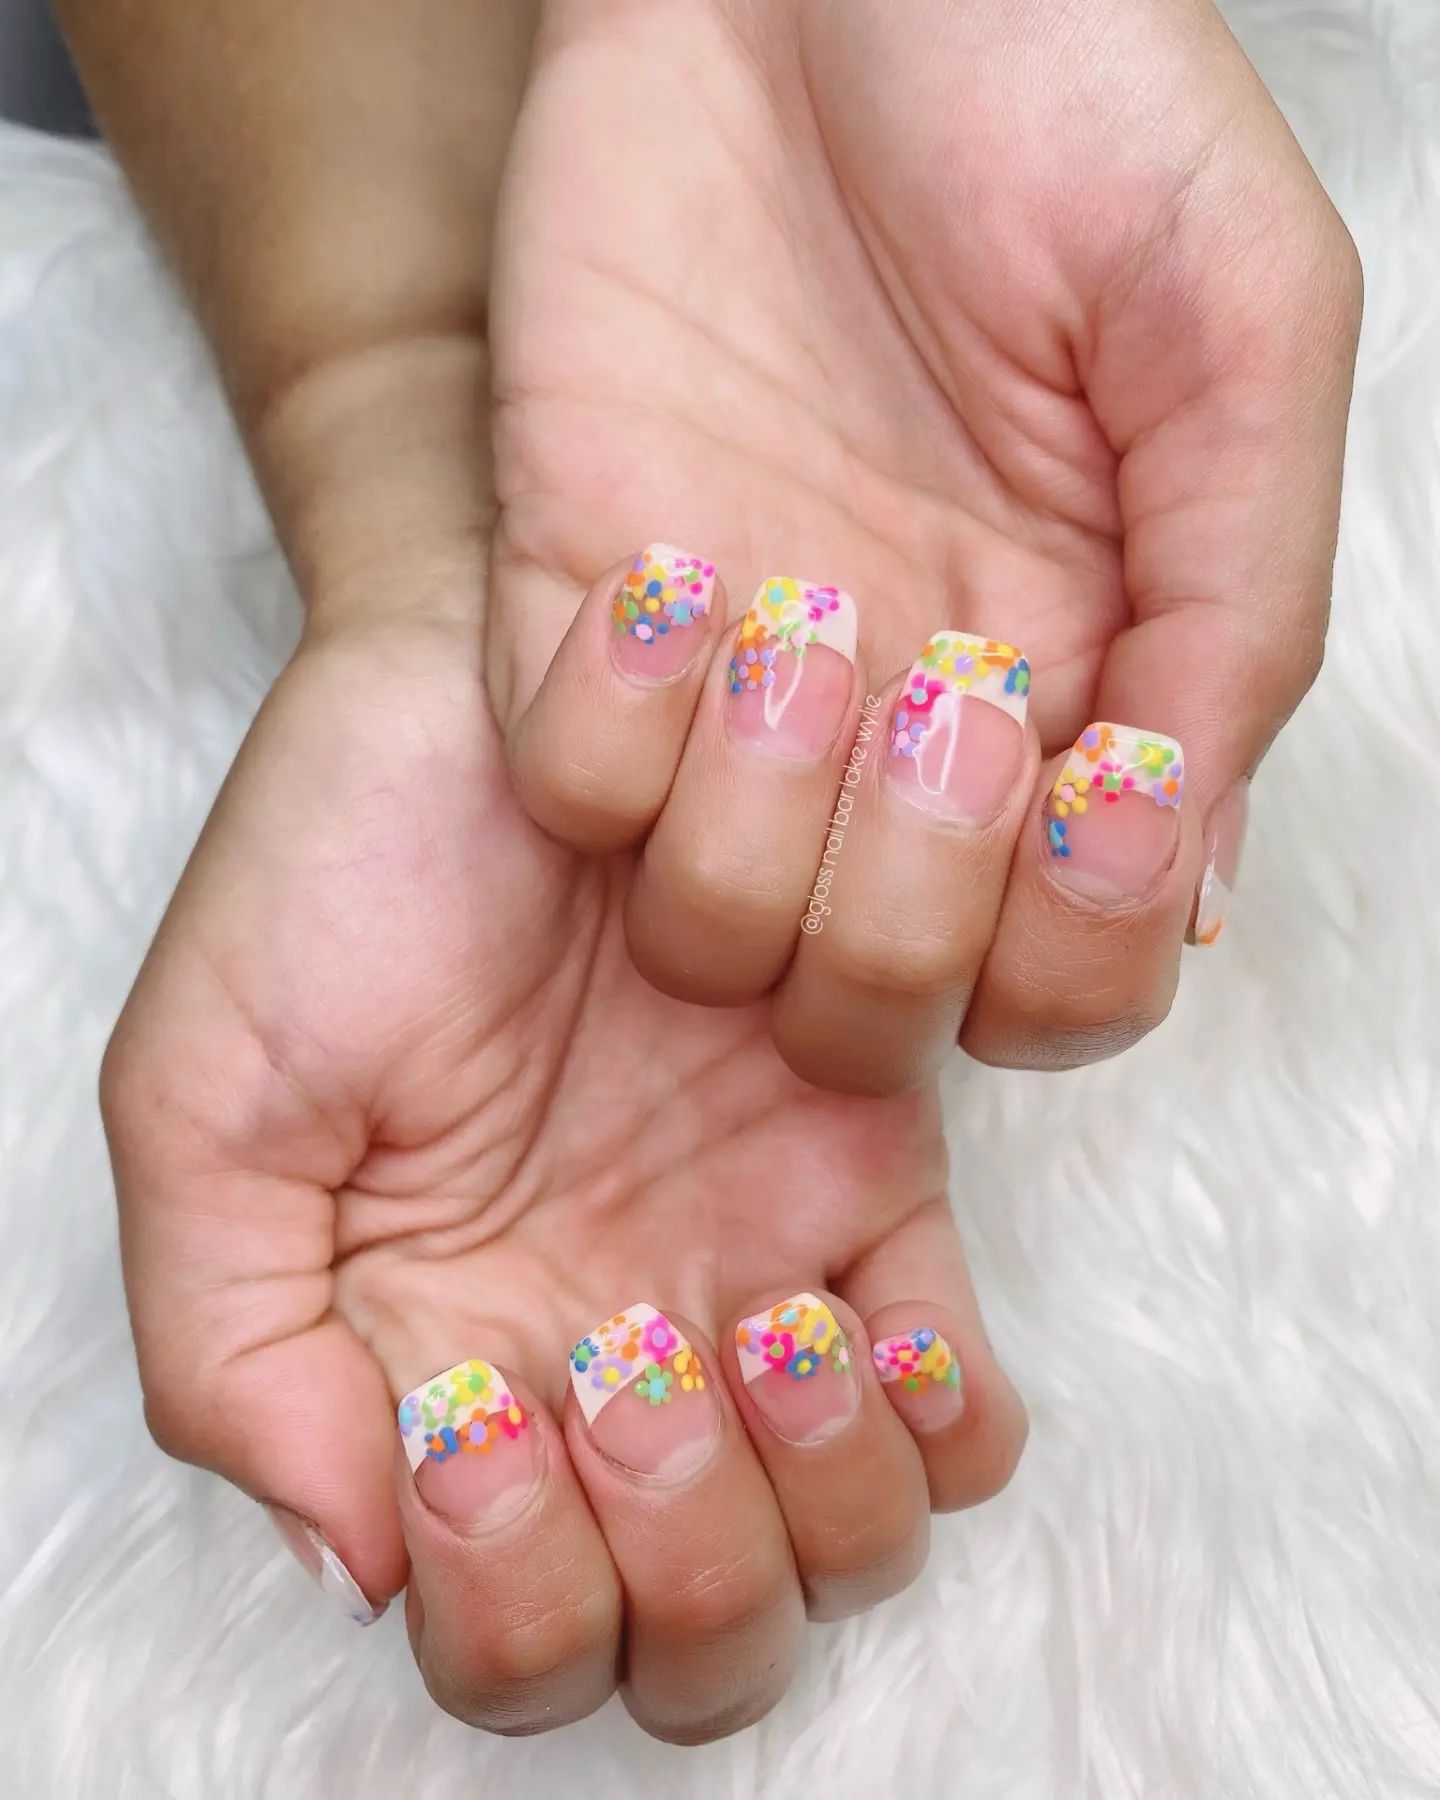  Sunny days are giving us all the happy feels. So, let's have the summer nails of your dreams with these colorful daisies!